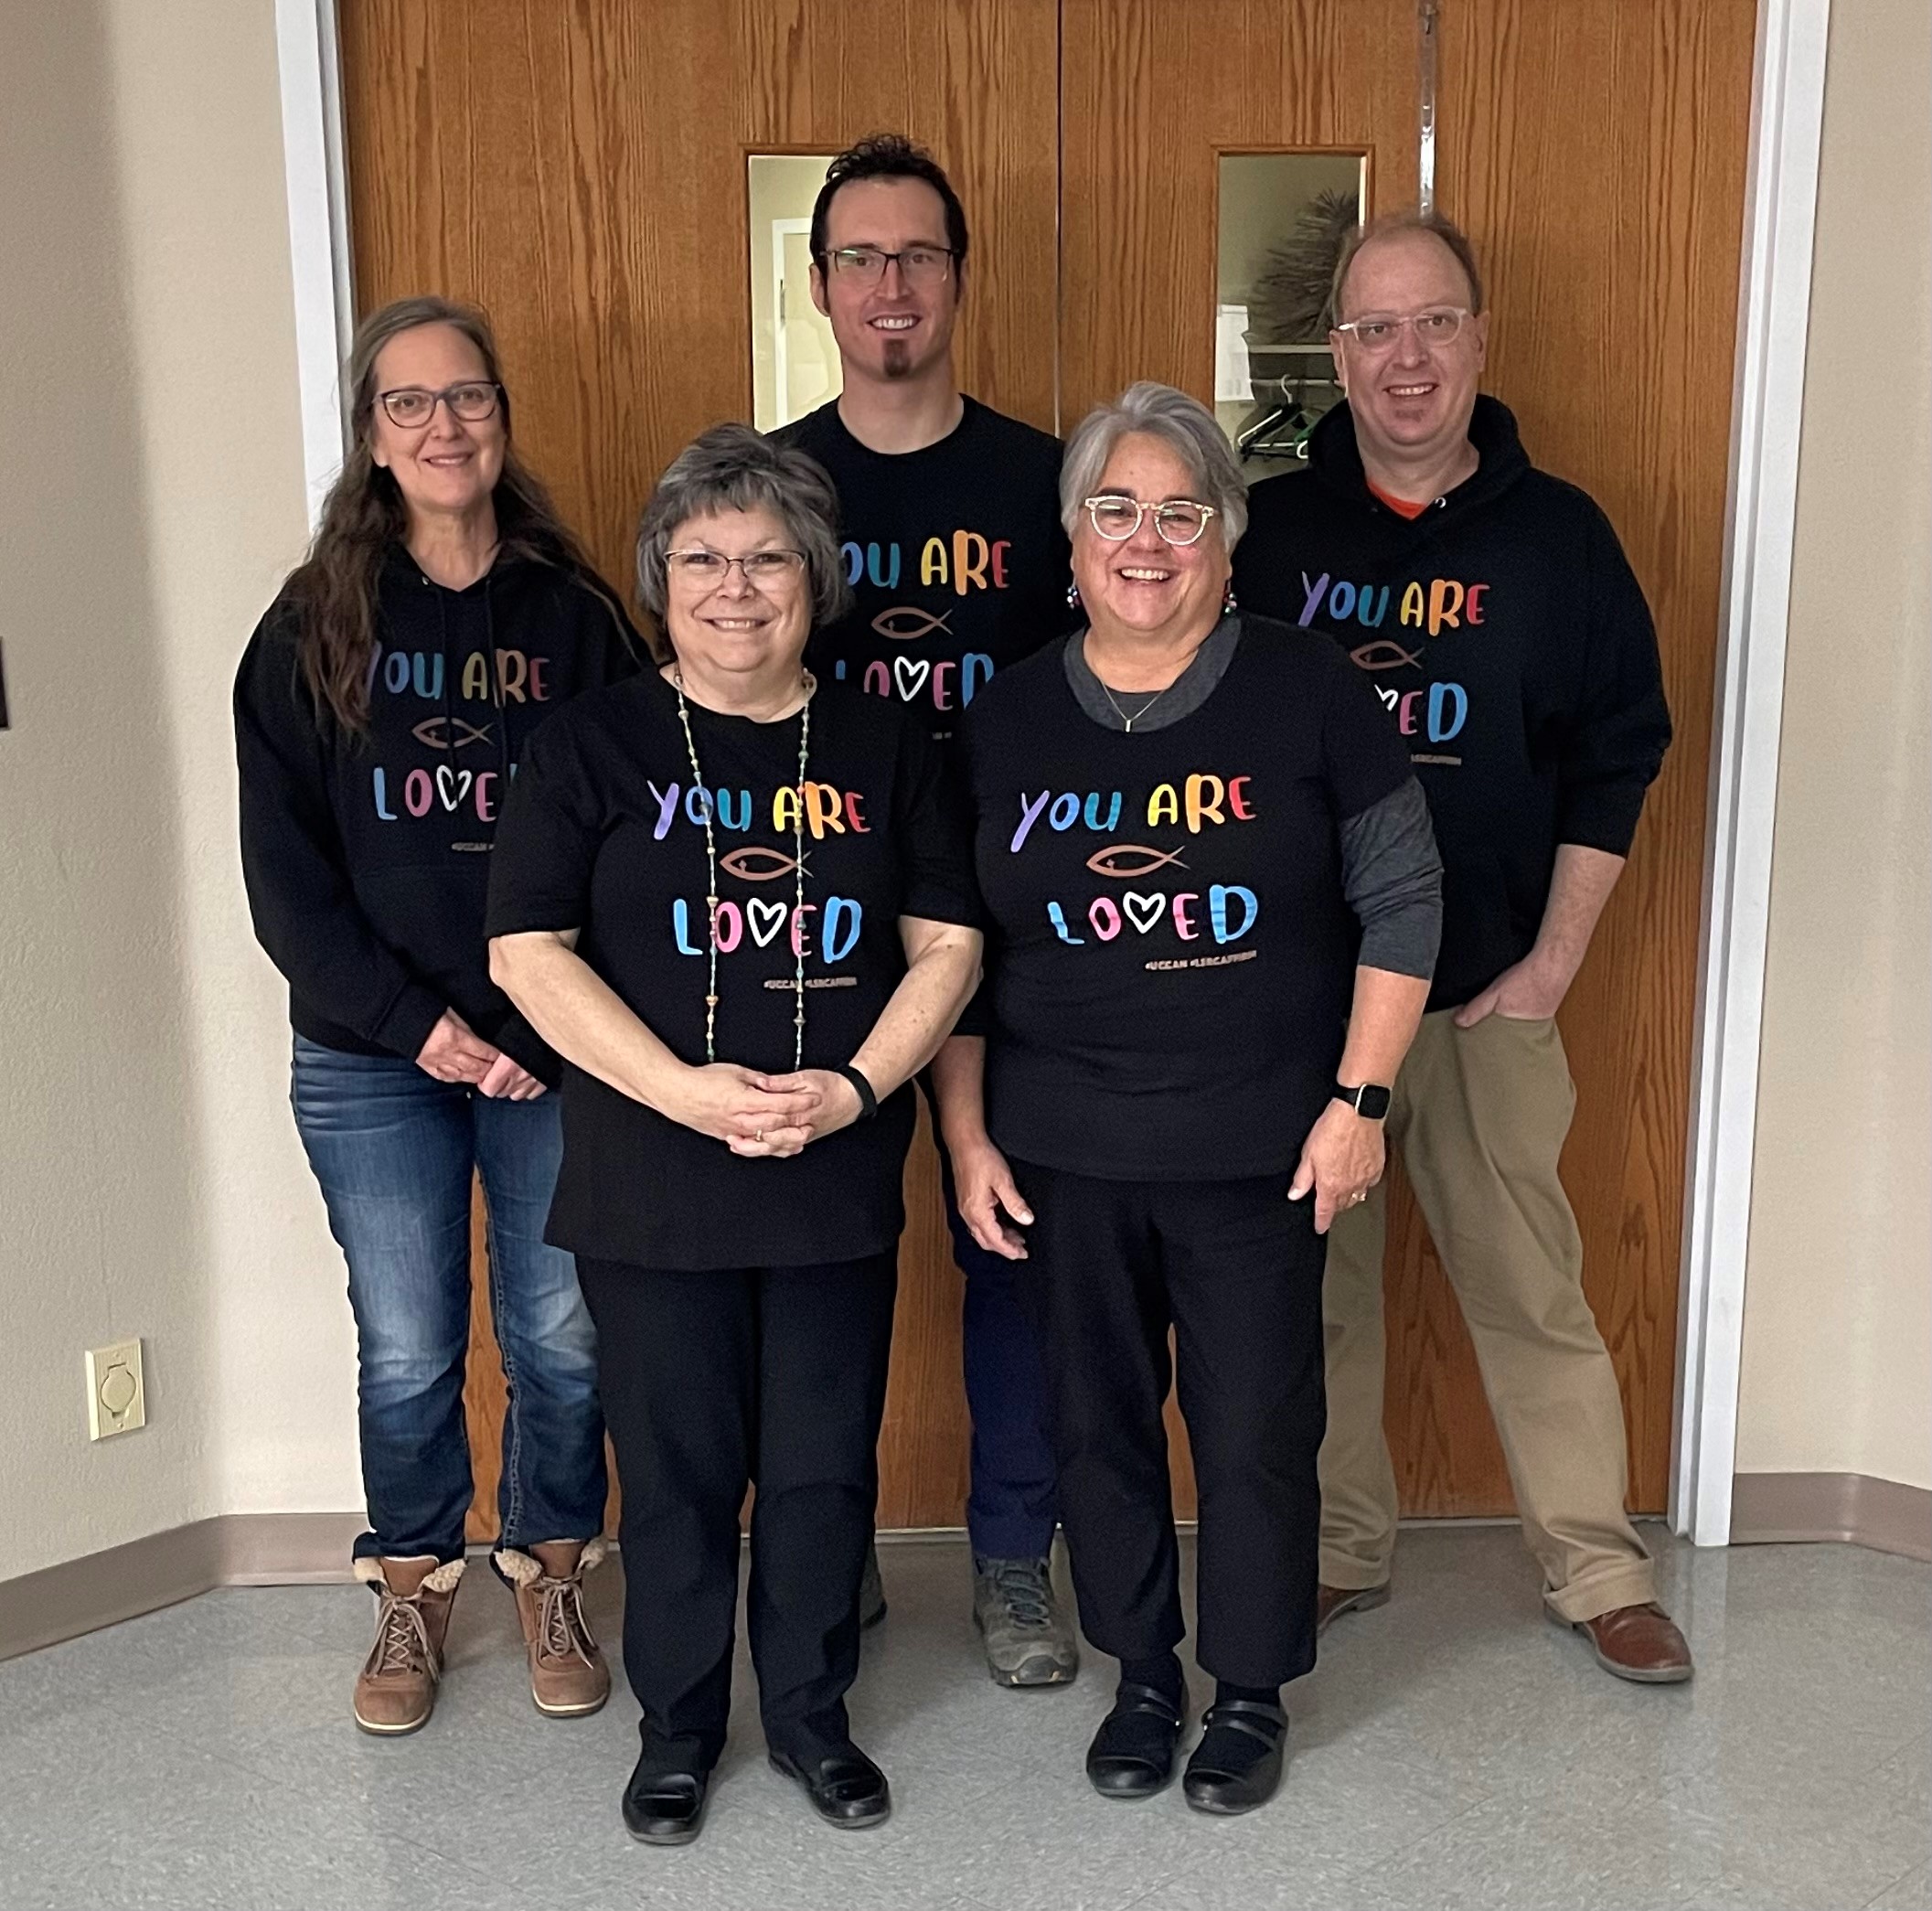 A group of 5 people wearing black t shirts with rainbow lettering reading "You are loved".